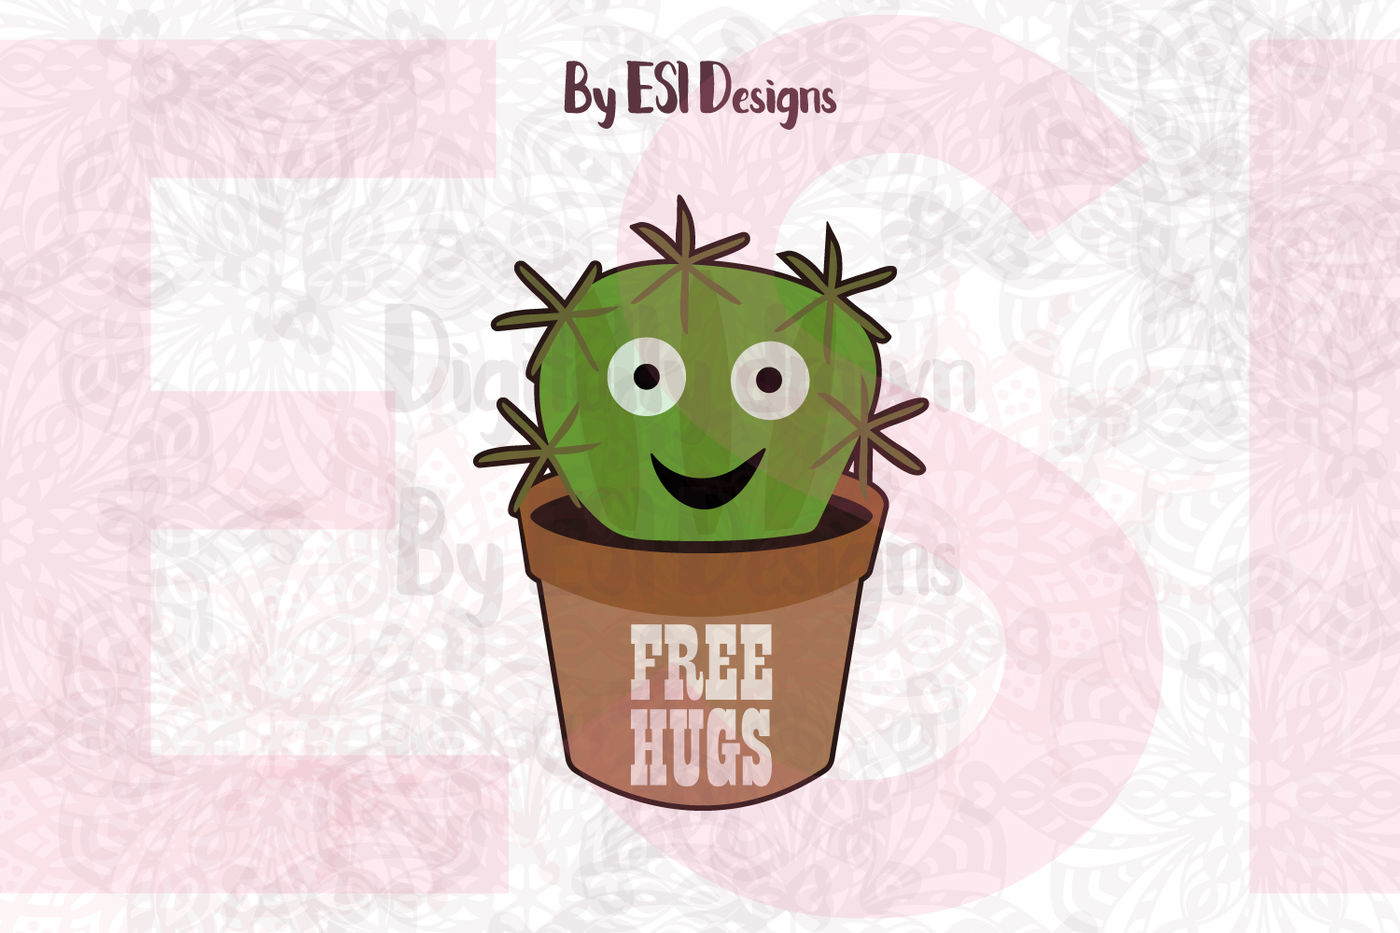 ori 76987 87b7ed4fdb0155fec86aaa8418322de55c8a8f9e free hugs cactus in a pot svg dxf eps and png cutting files clipart printable